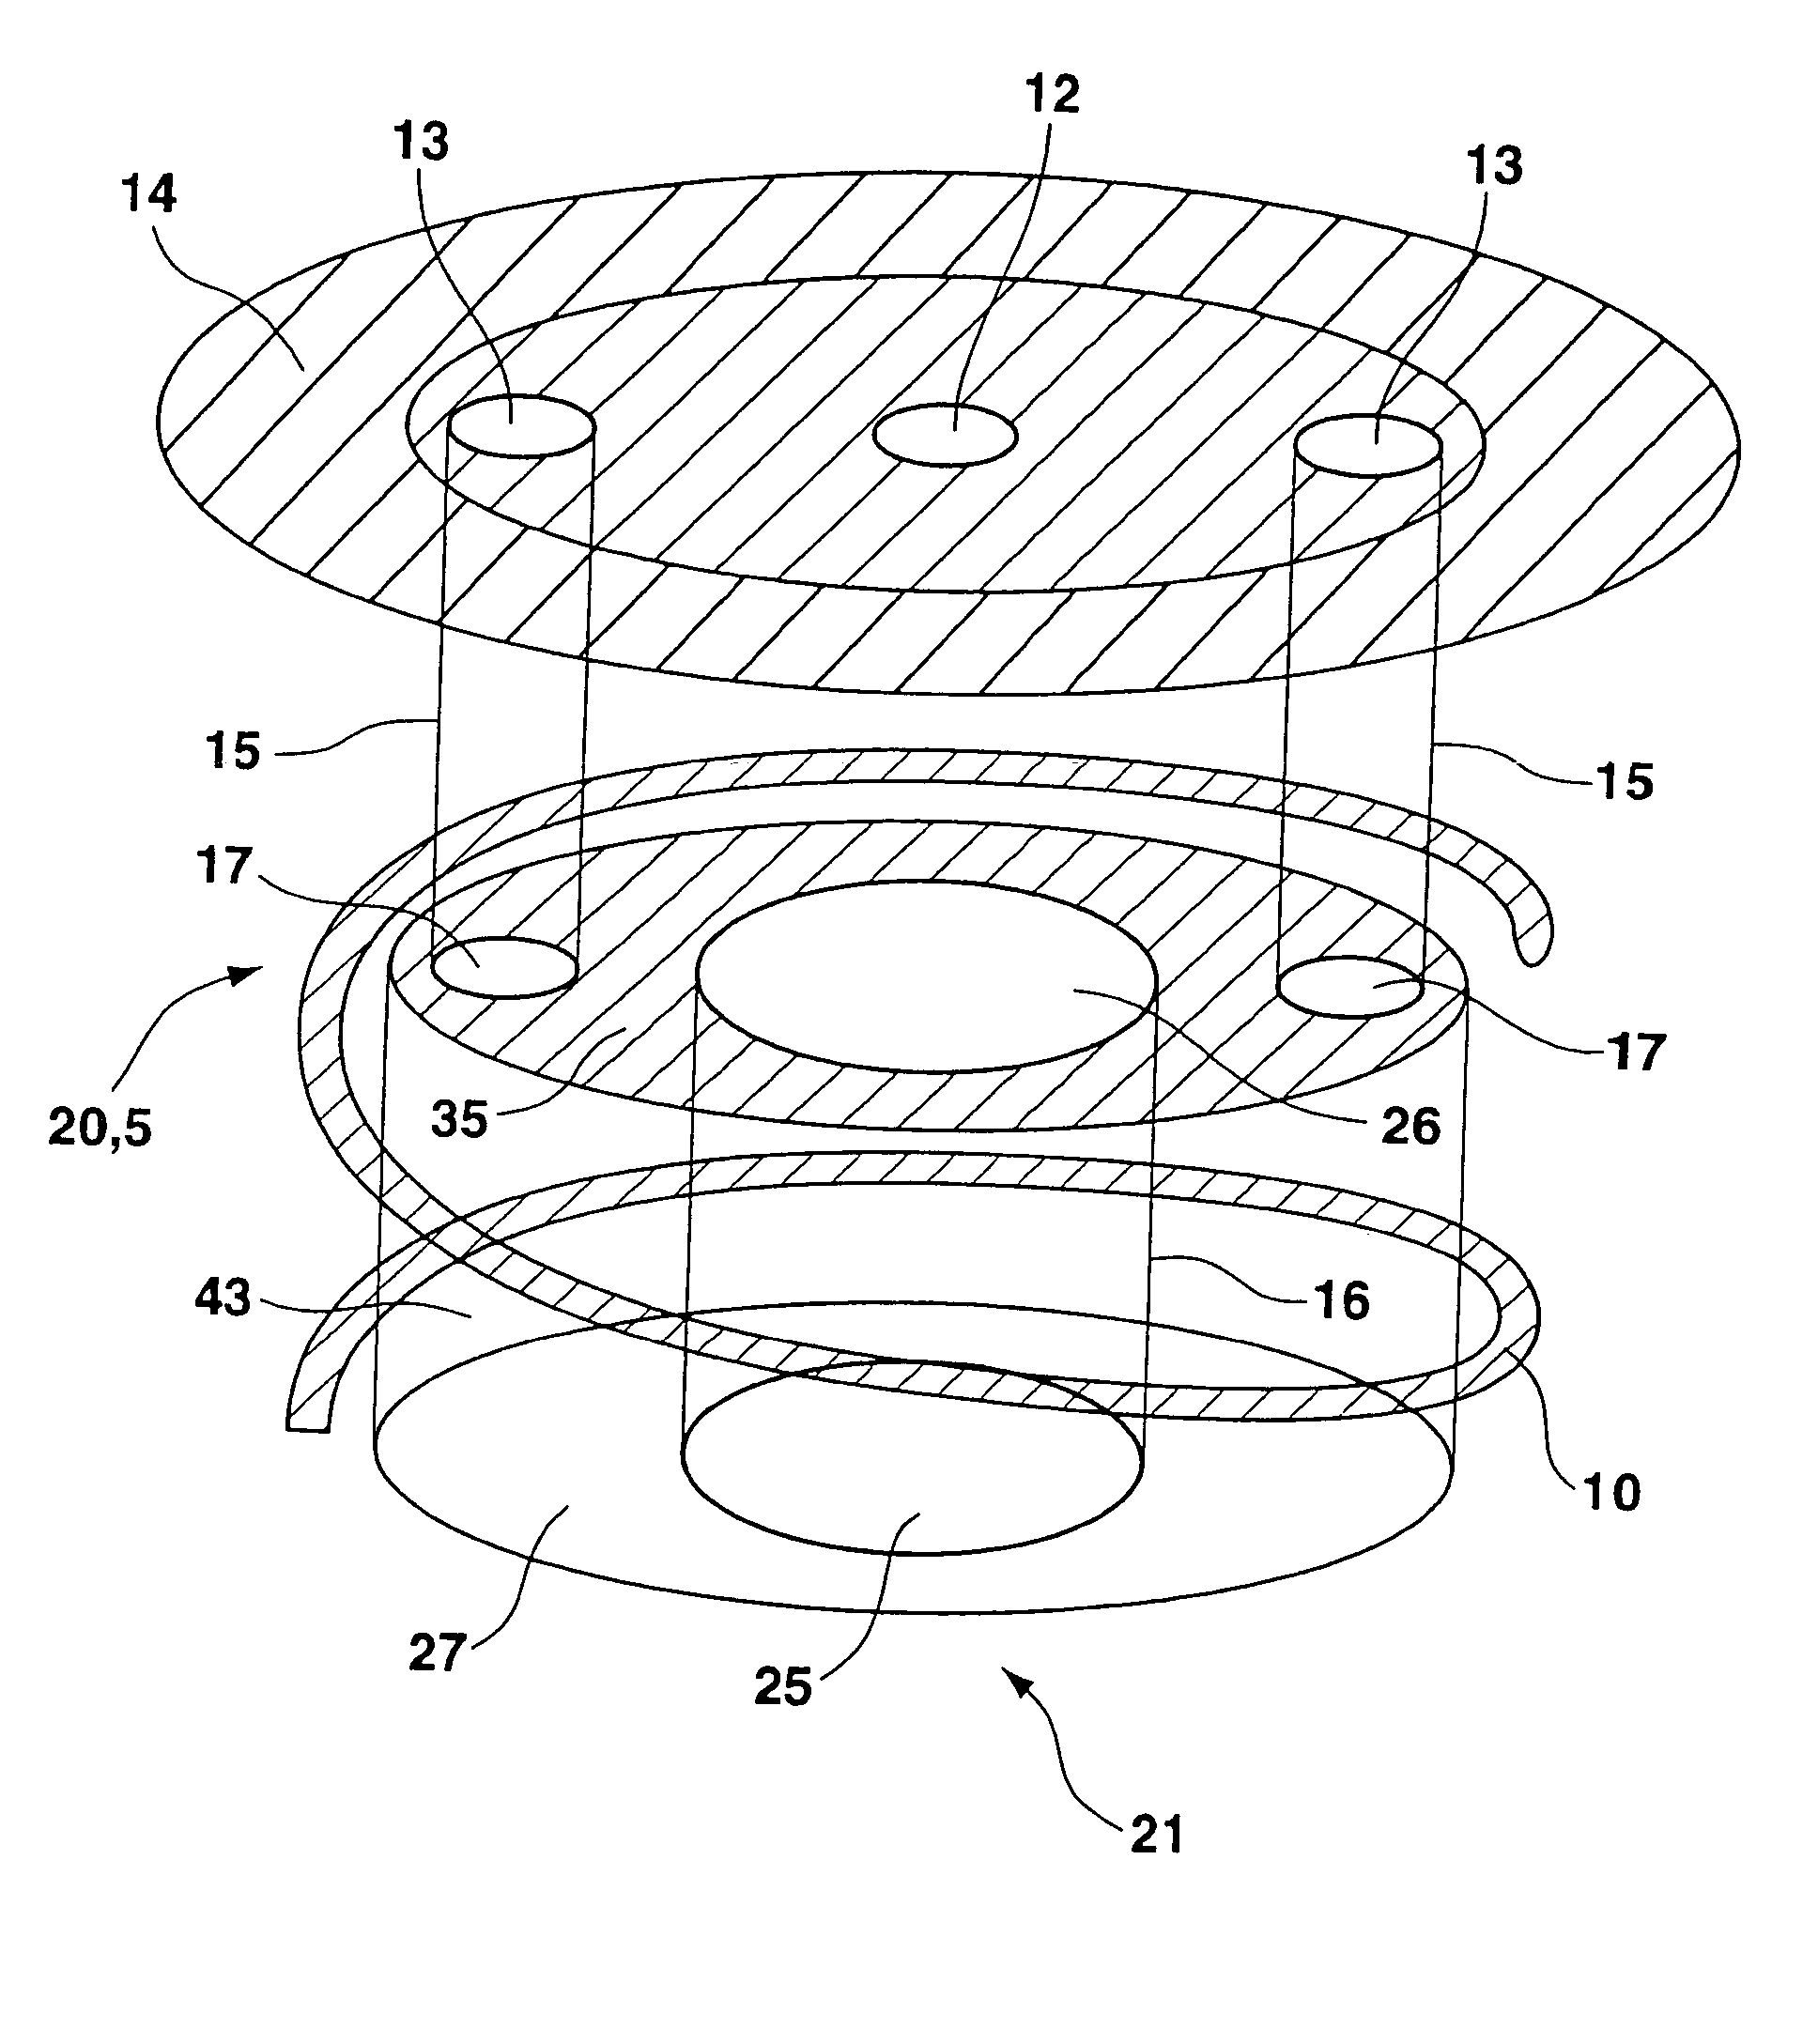 Device and method for anisotropic plasma etching of a substrate, a silicon body in particular